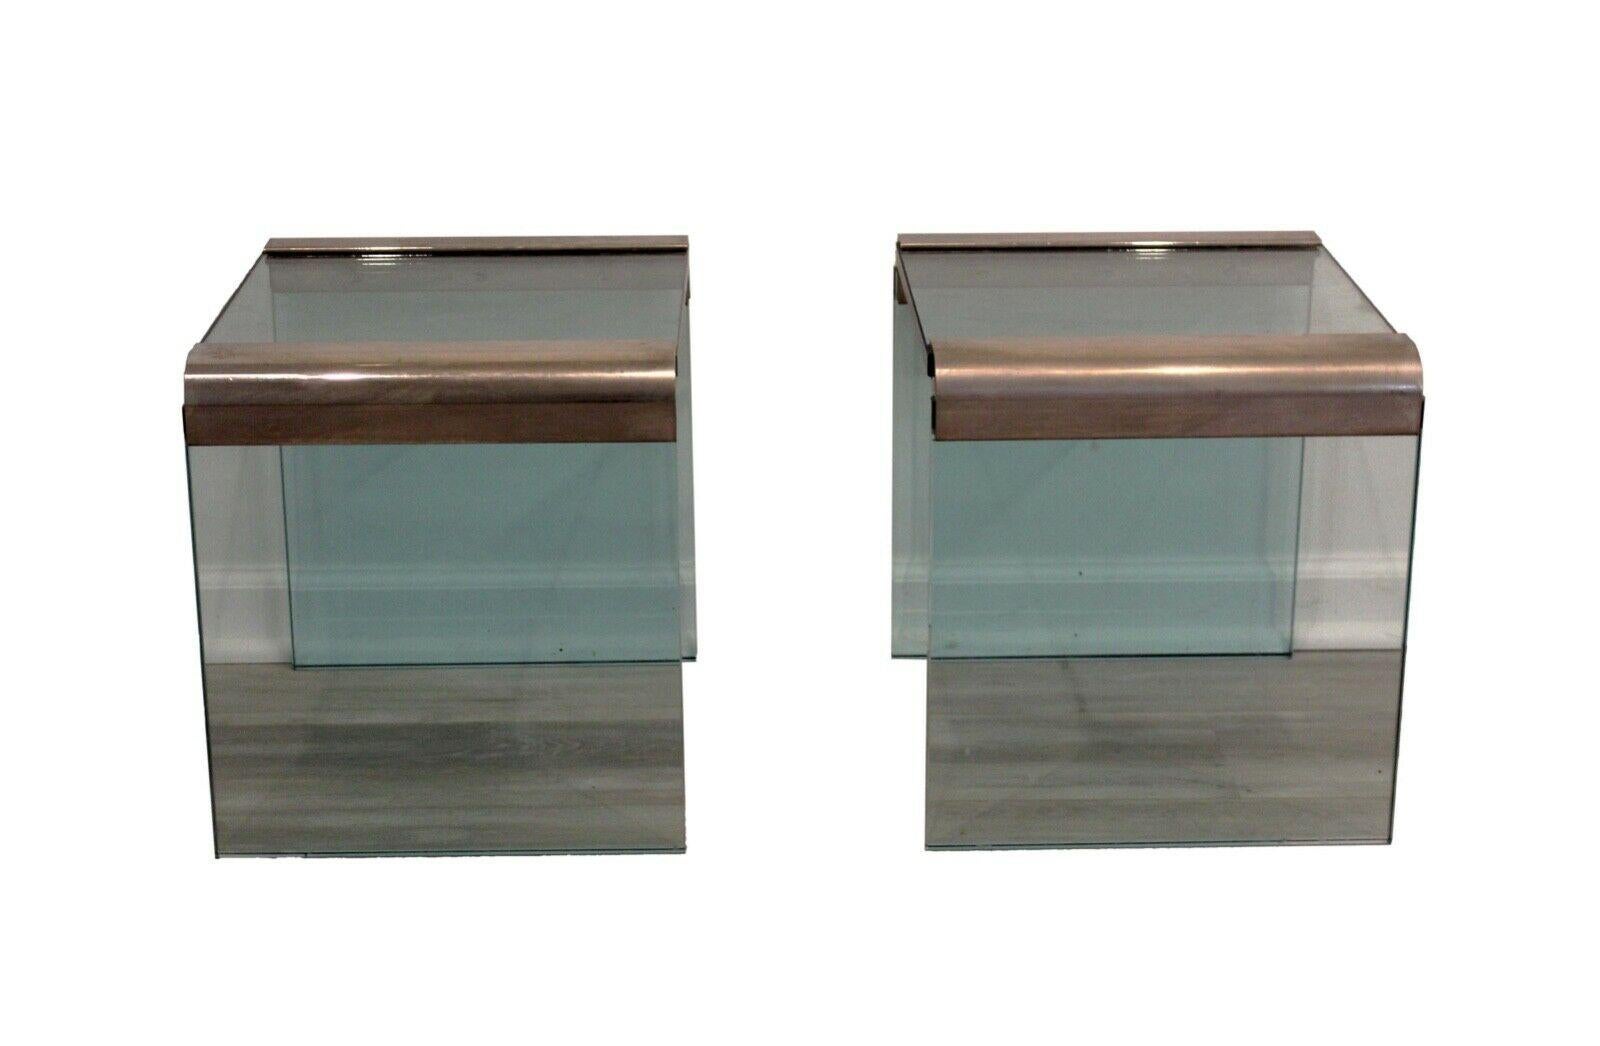 From Le Shoppe Too in Michigan, this pair of postmodern side or end tables made by Pace Manufacturing combines tempered glass with chrome straps easing the waterfall edges. A versatile pair for any modern or postmodern aesthetic. Chrome has some